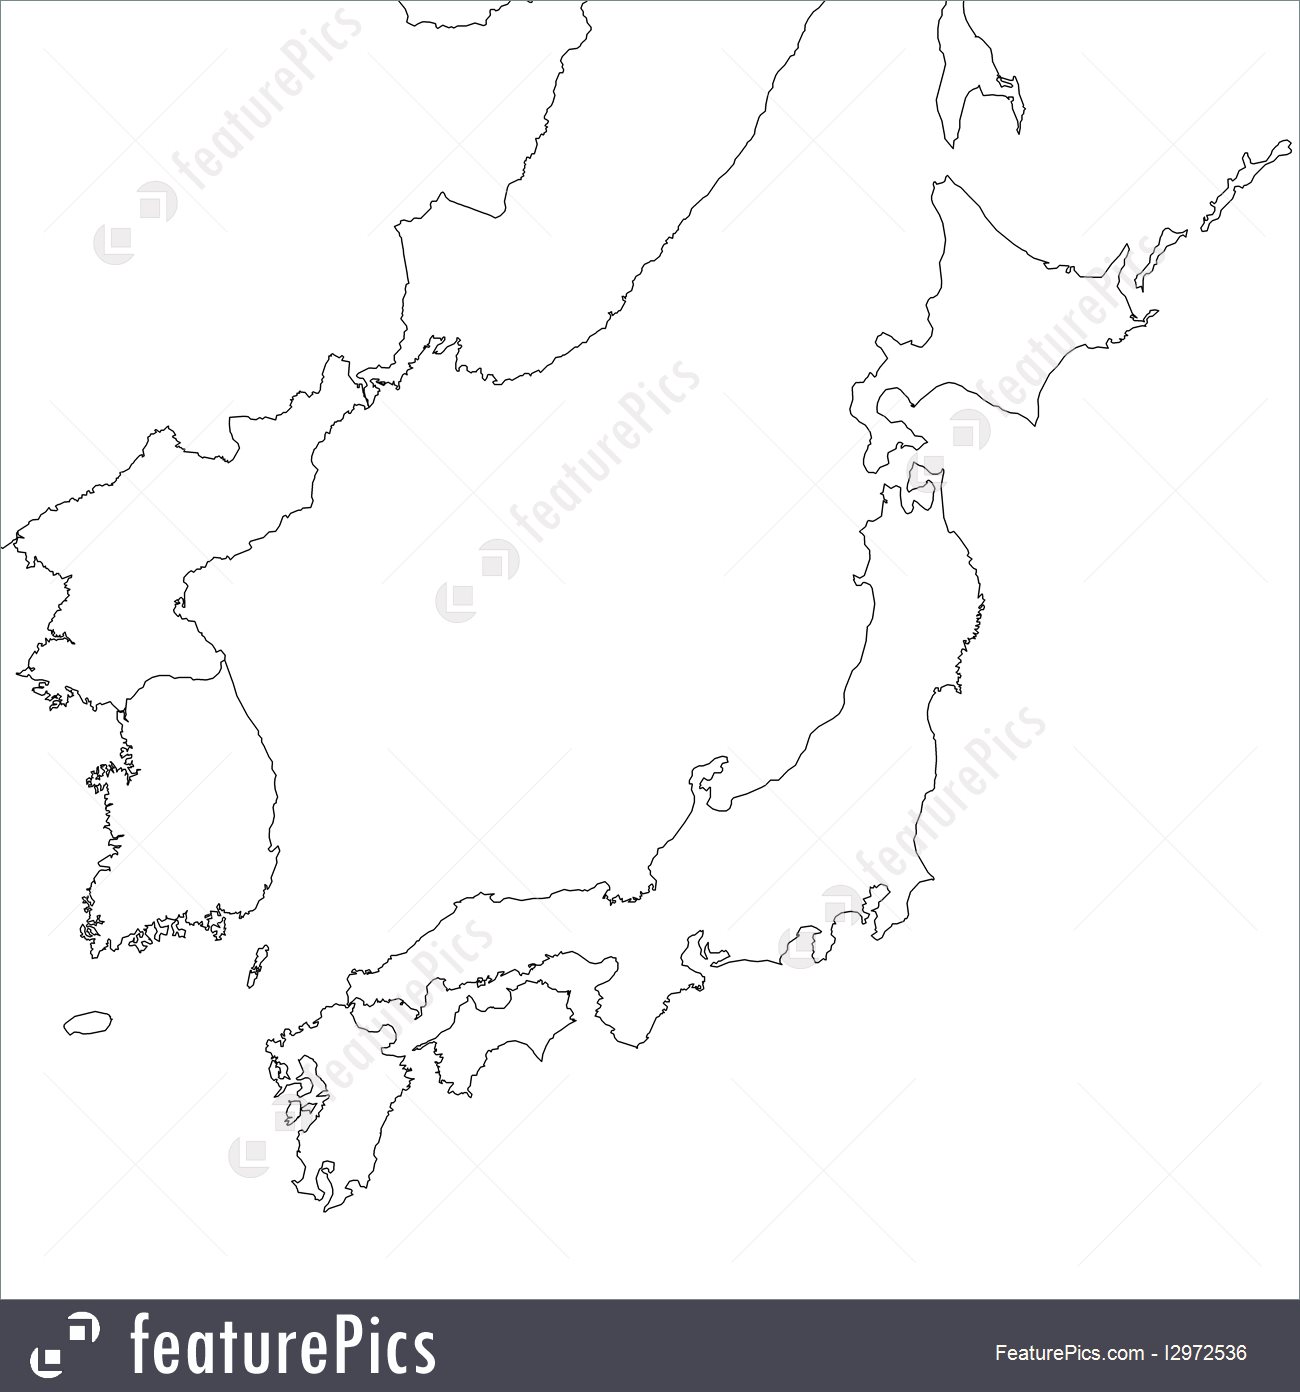 Best Images Of Printable Outline Map Of Japan Japan Map Outline Images